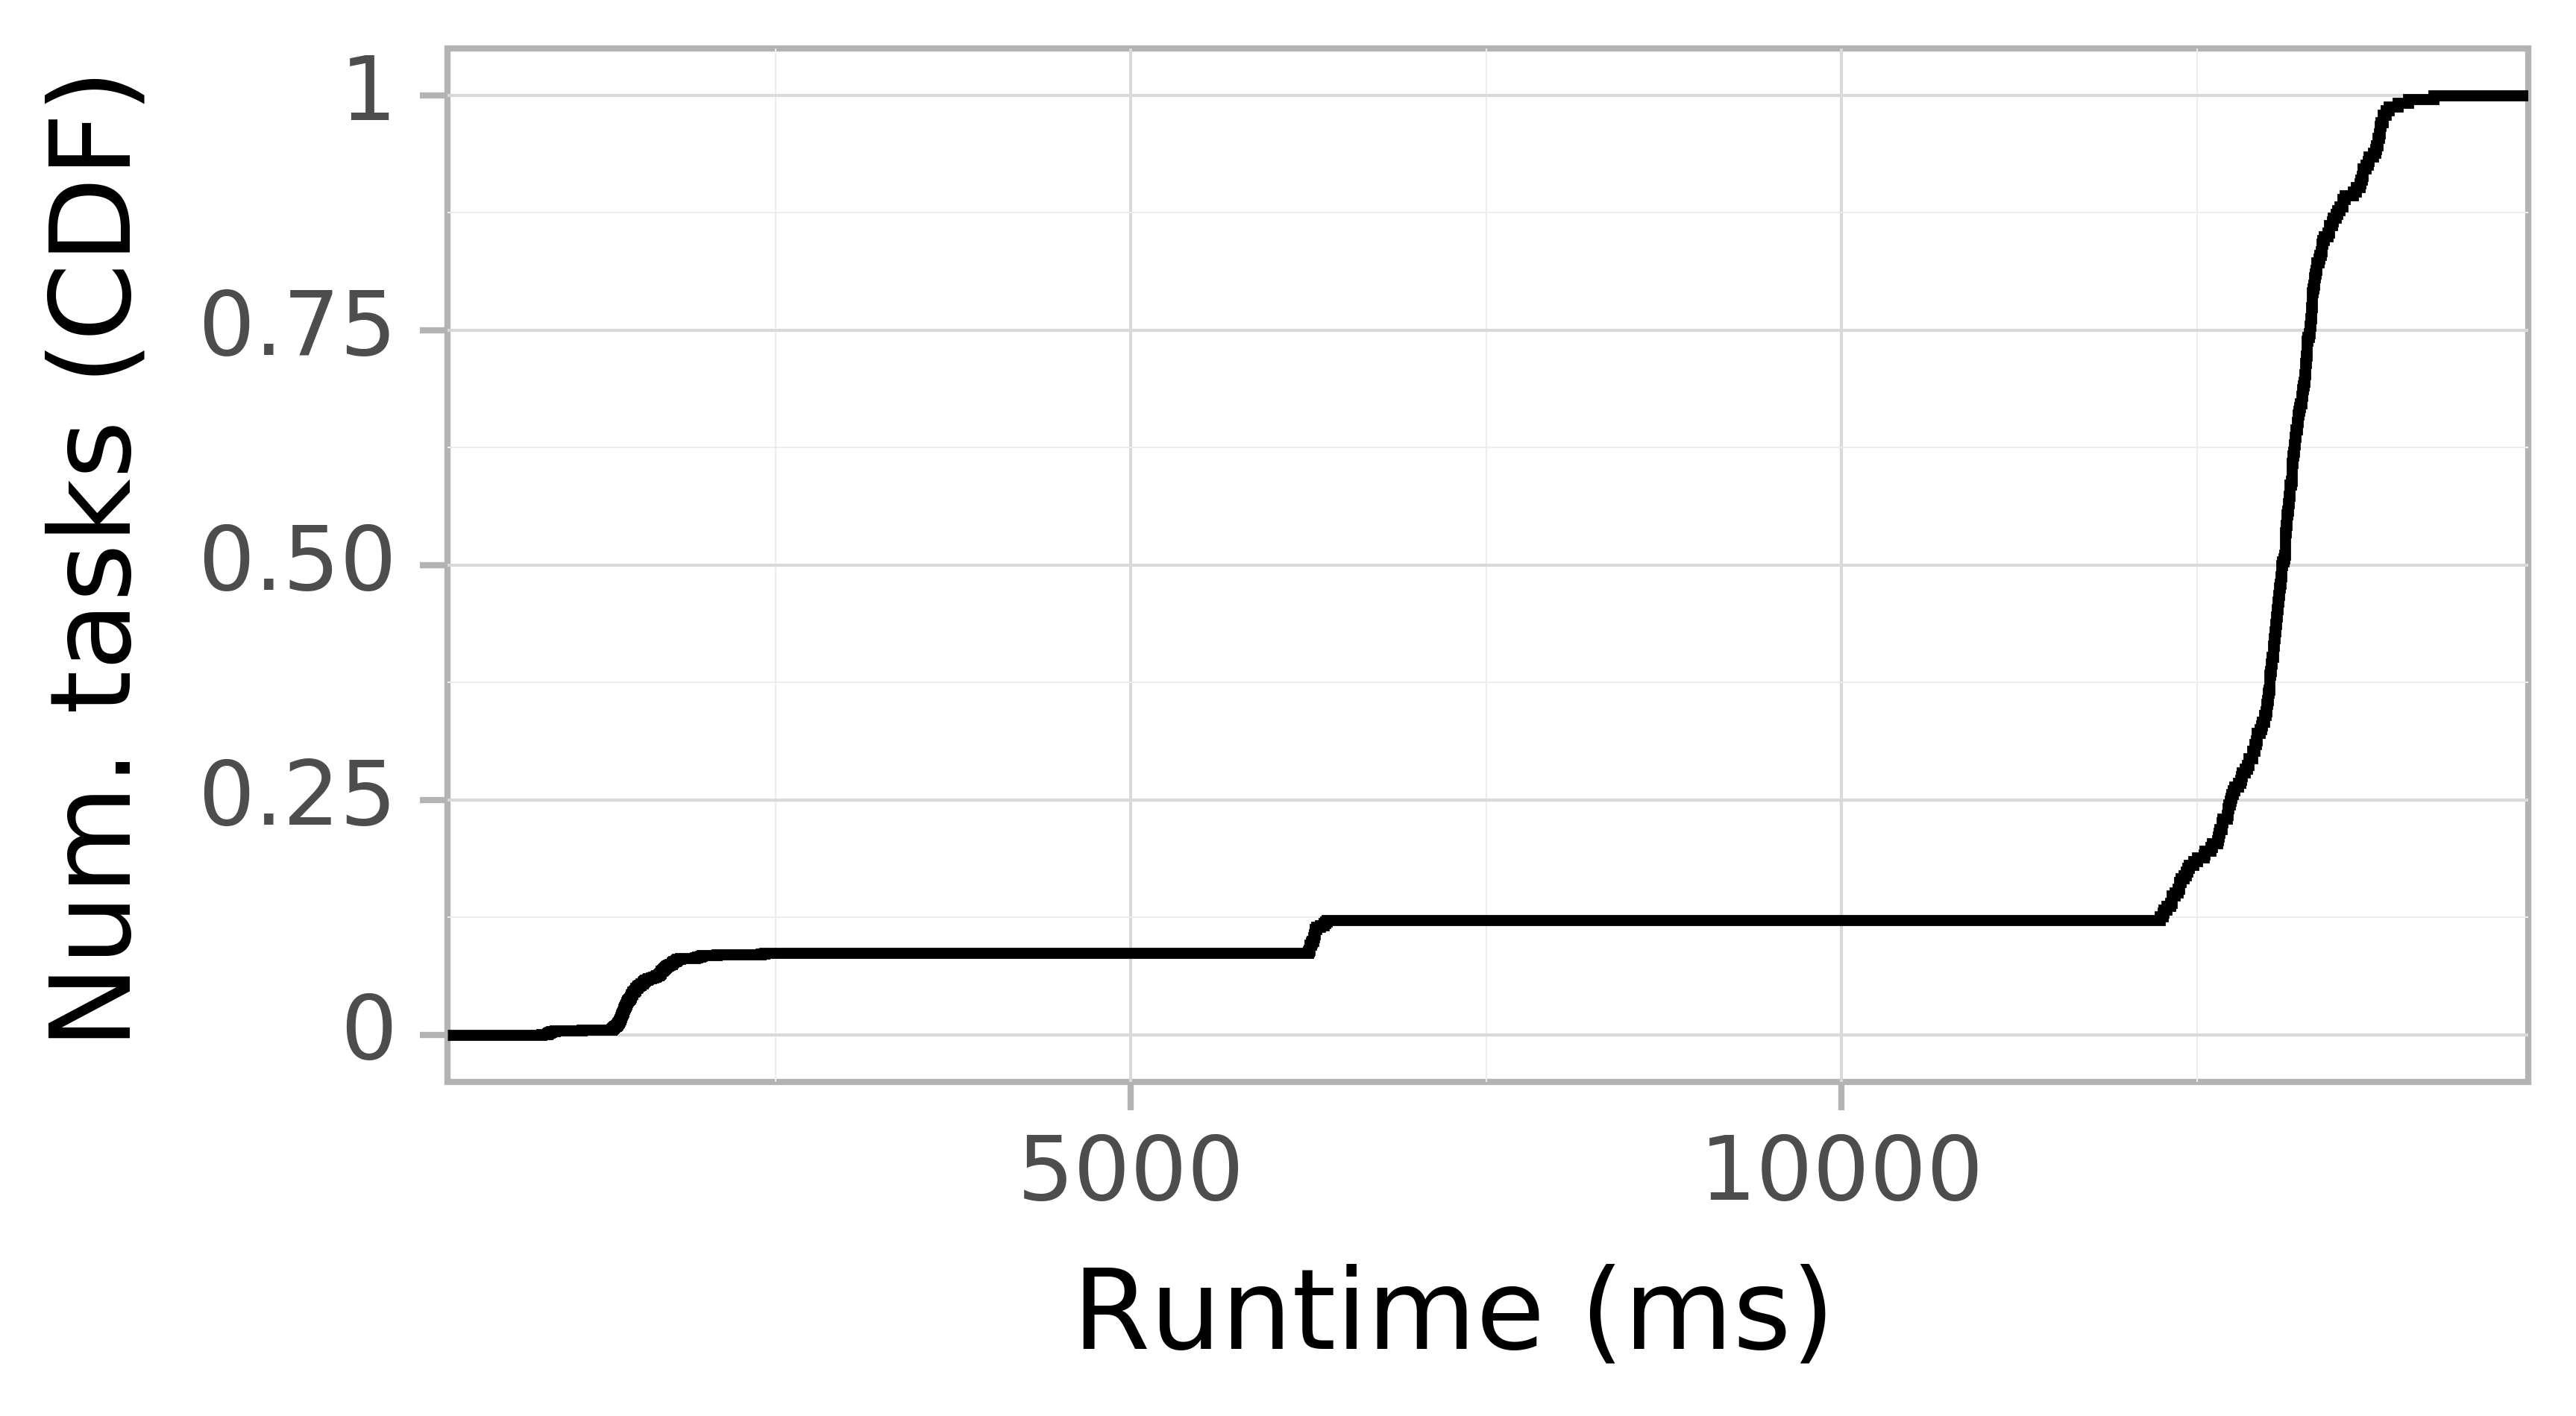 Task runtime CDF graph for the askalon-new_ee3 trace.